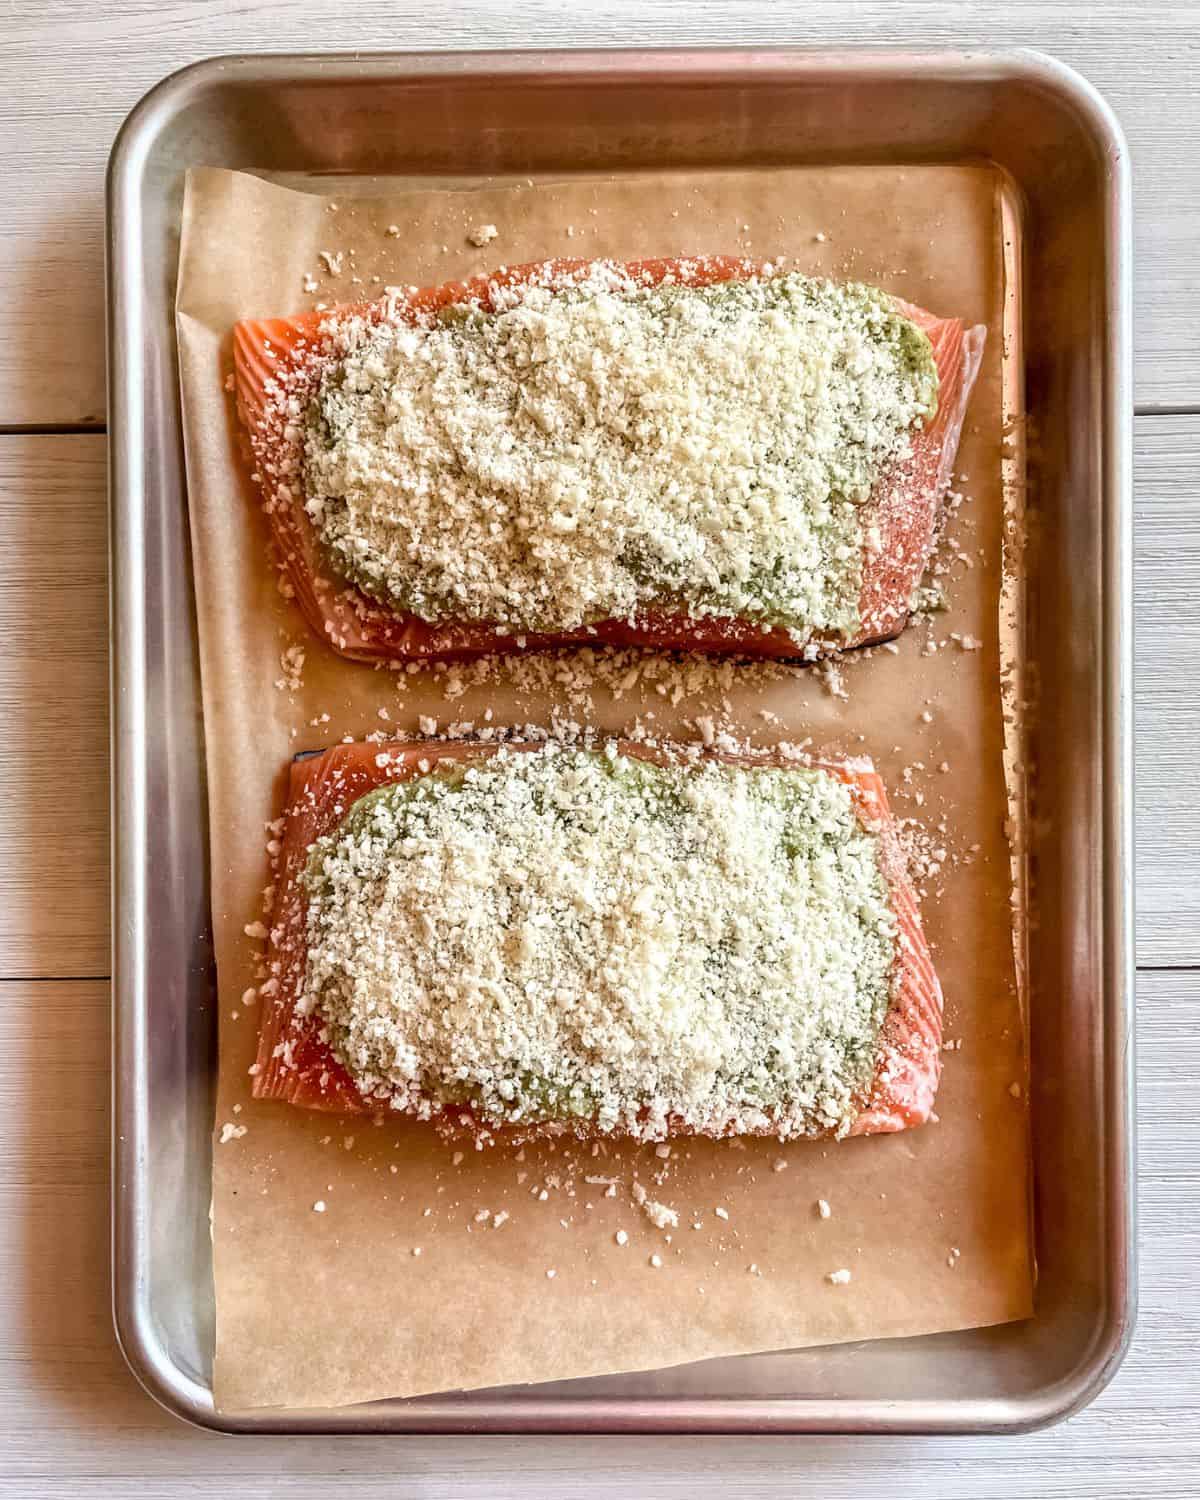 Fresh salmon filets on a parchment lined baking sheet topped with pesto and panko bread crumbs.